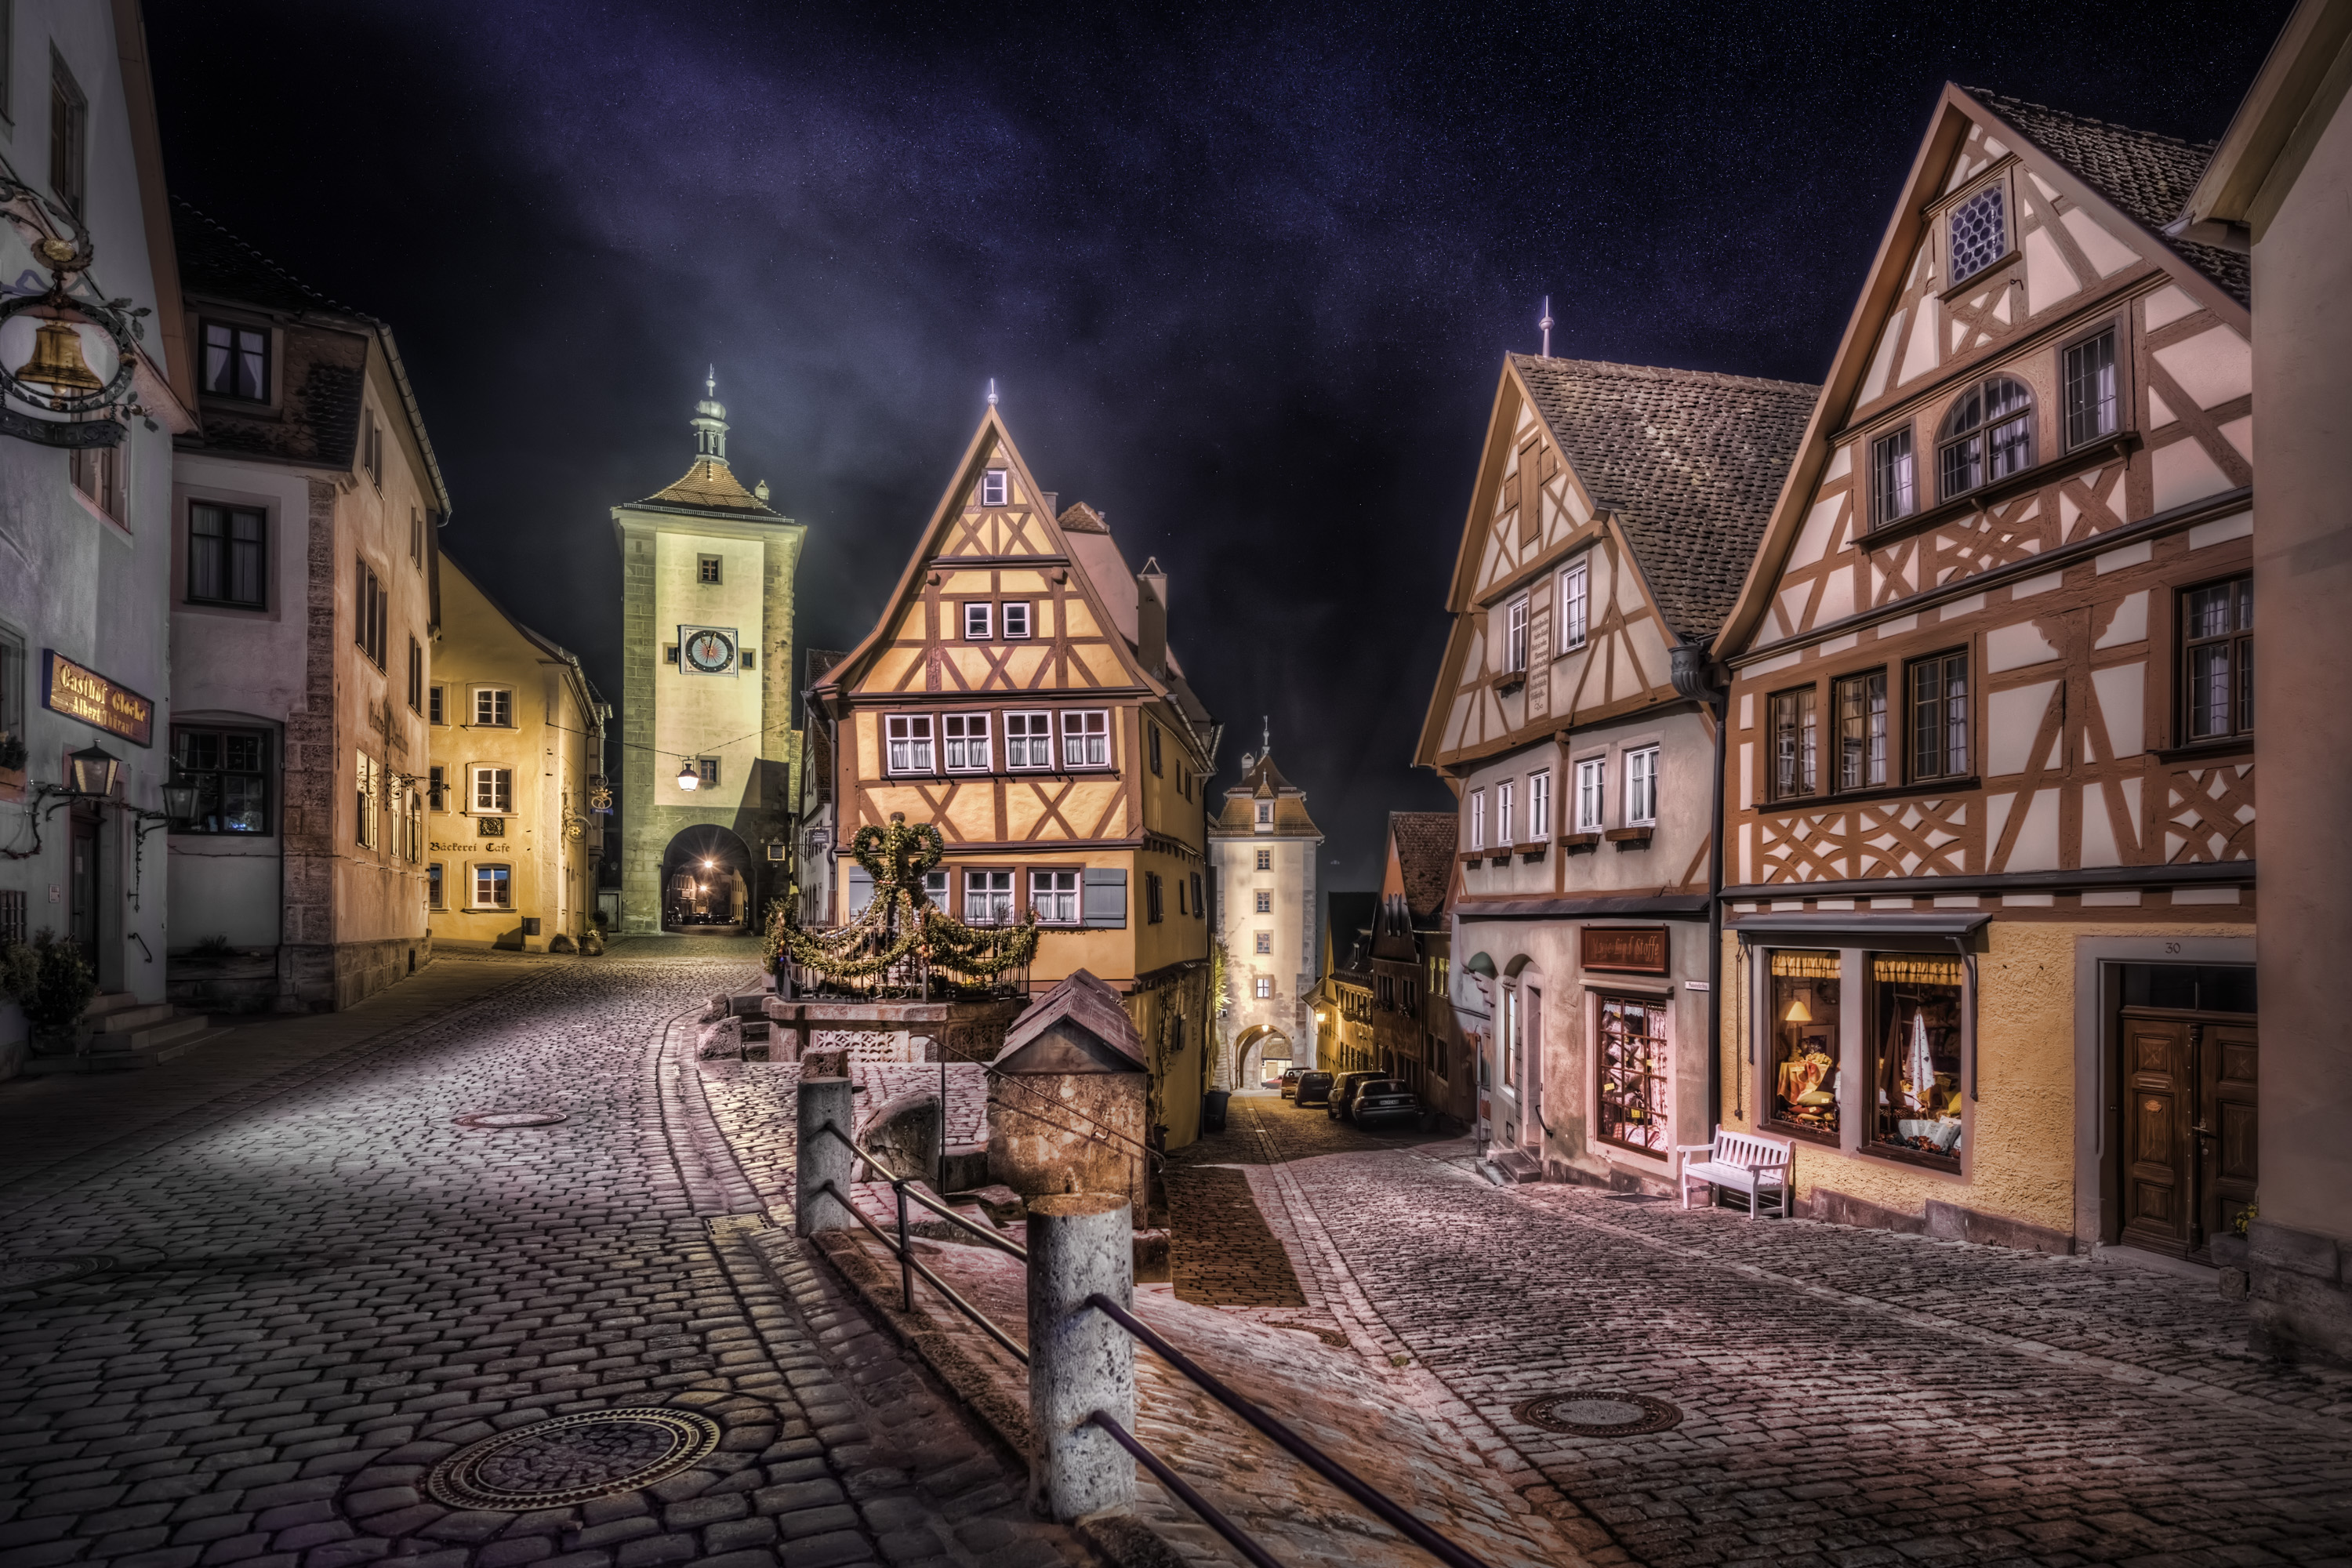 europe, germany, man made, rothenburg, night, road, sky, stars, tower clock, town, cities